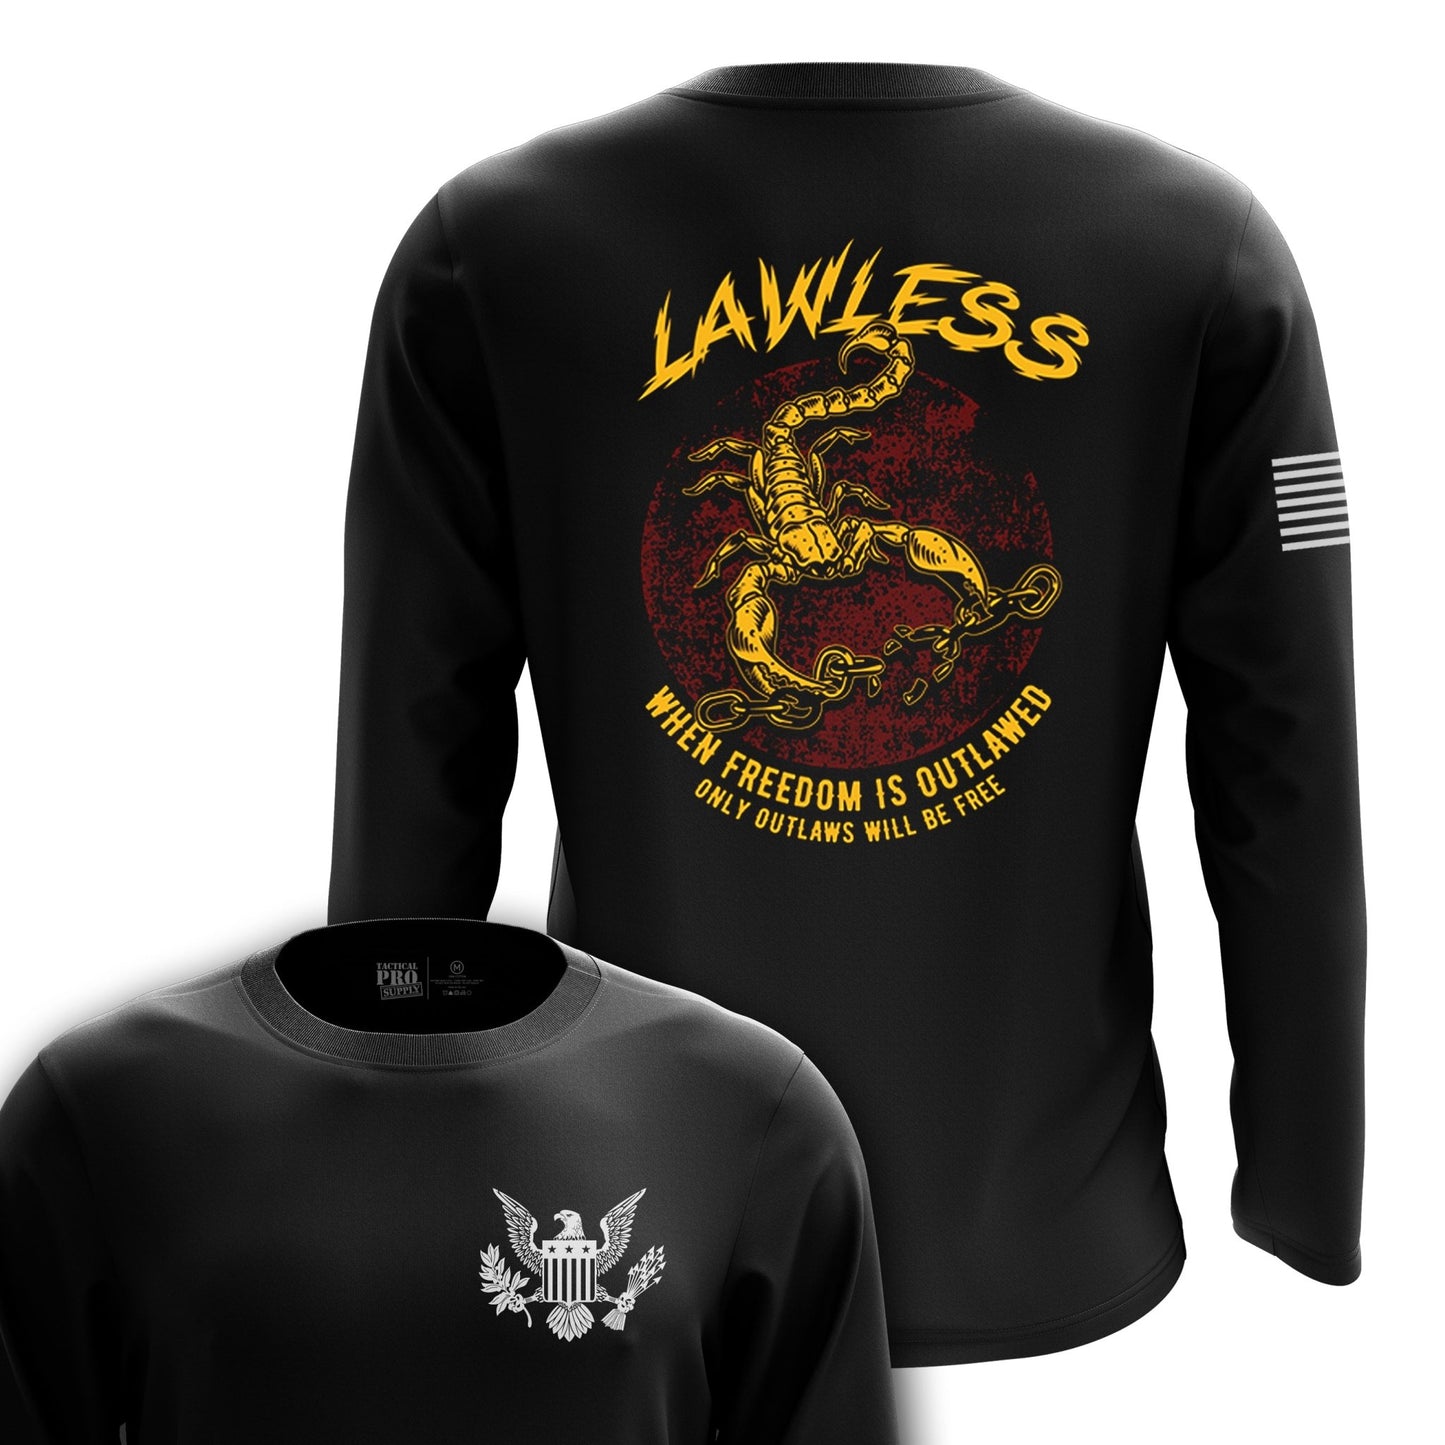 Lawless - Tactical Pro Supply, LLC